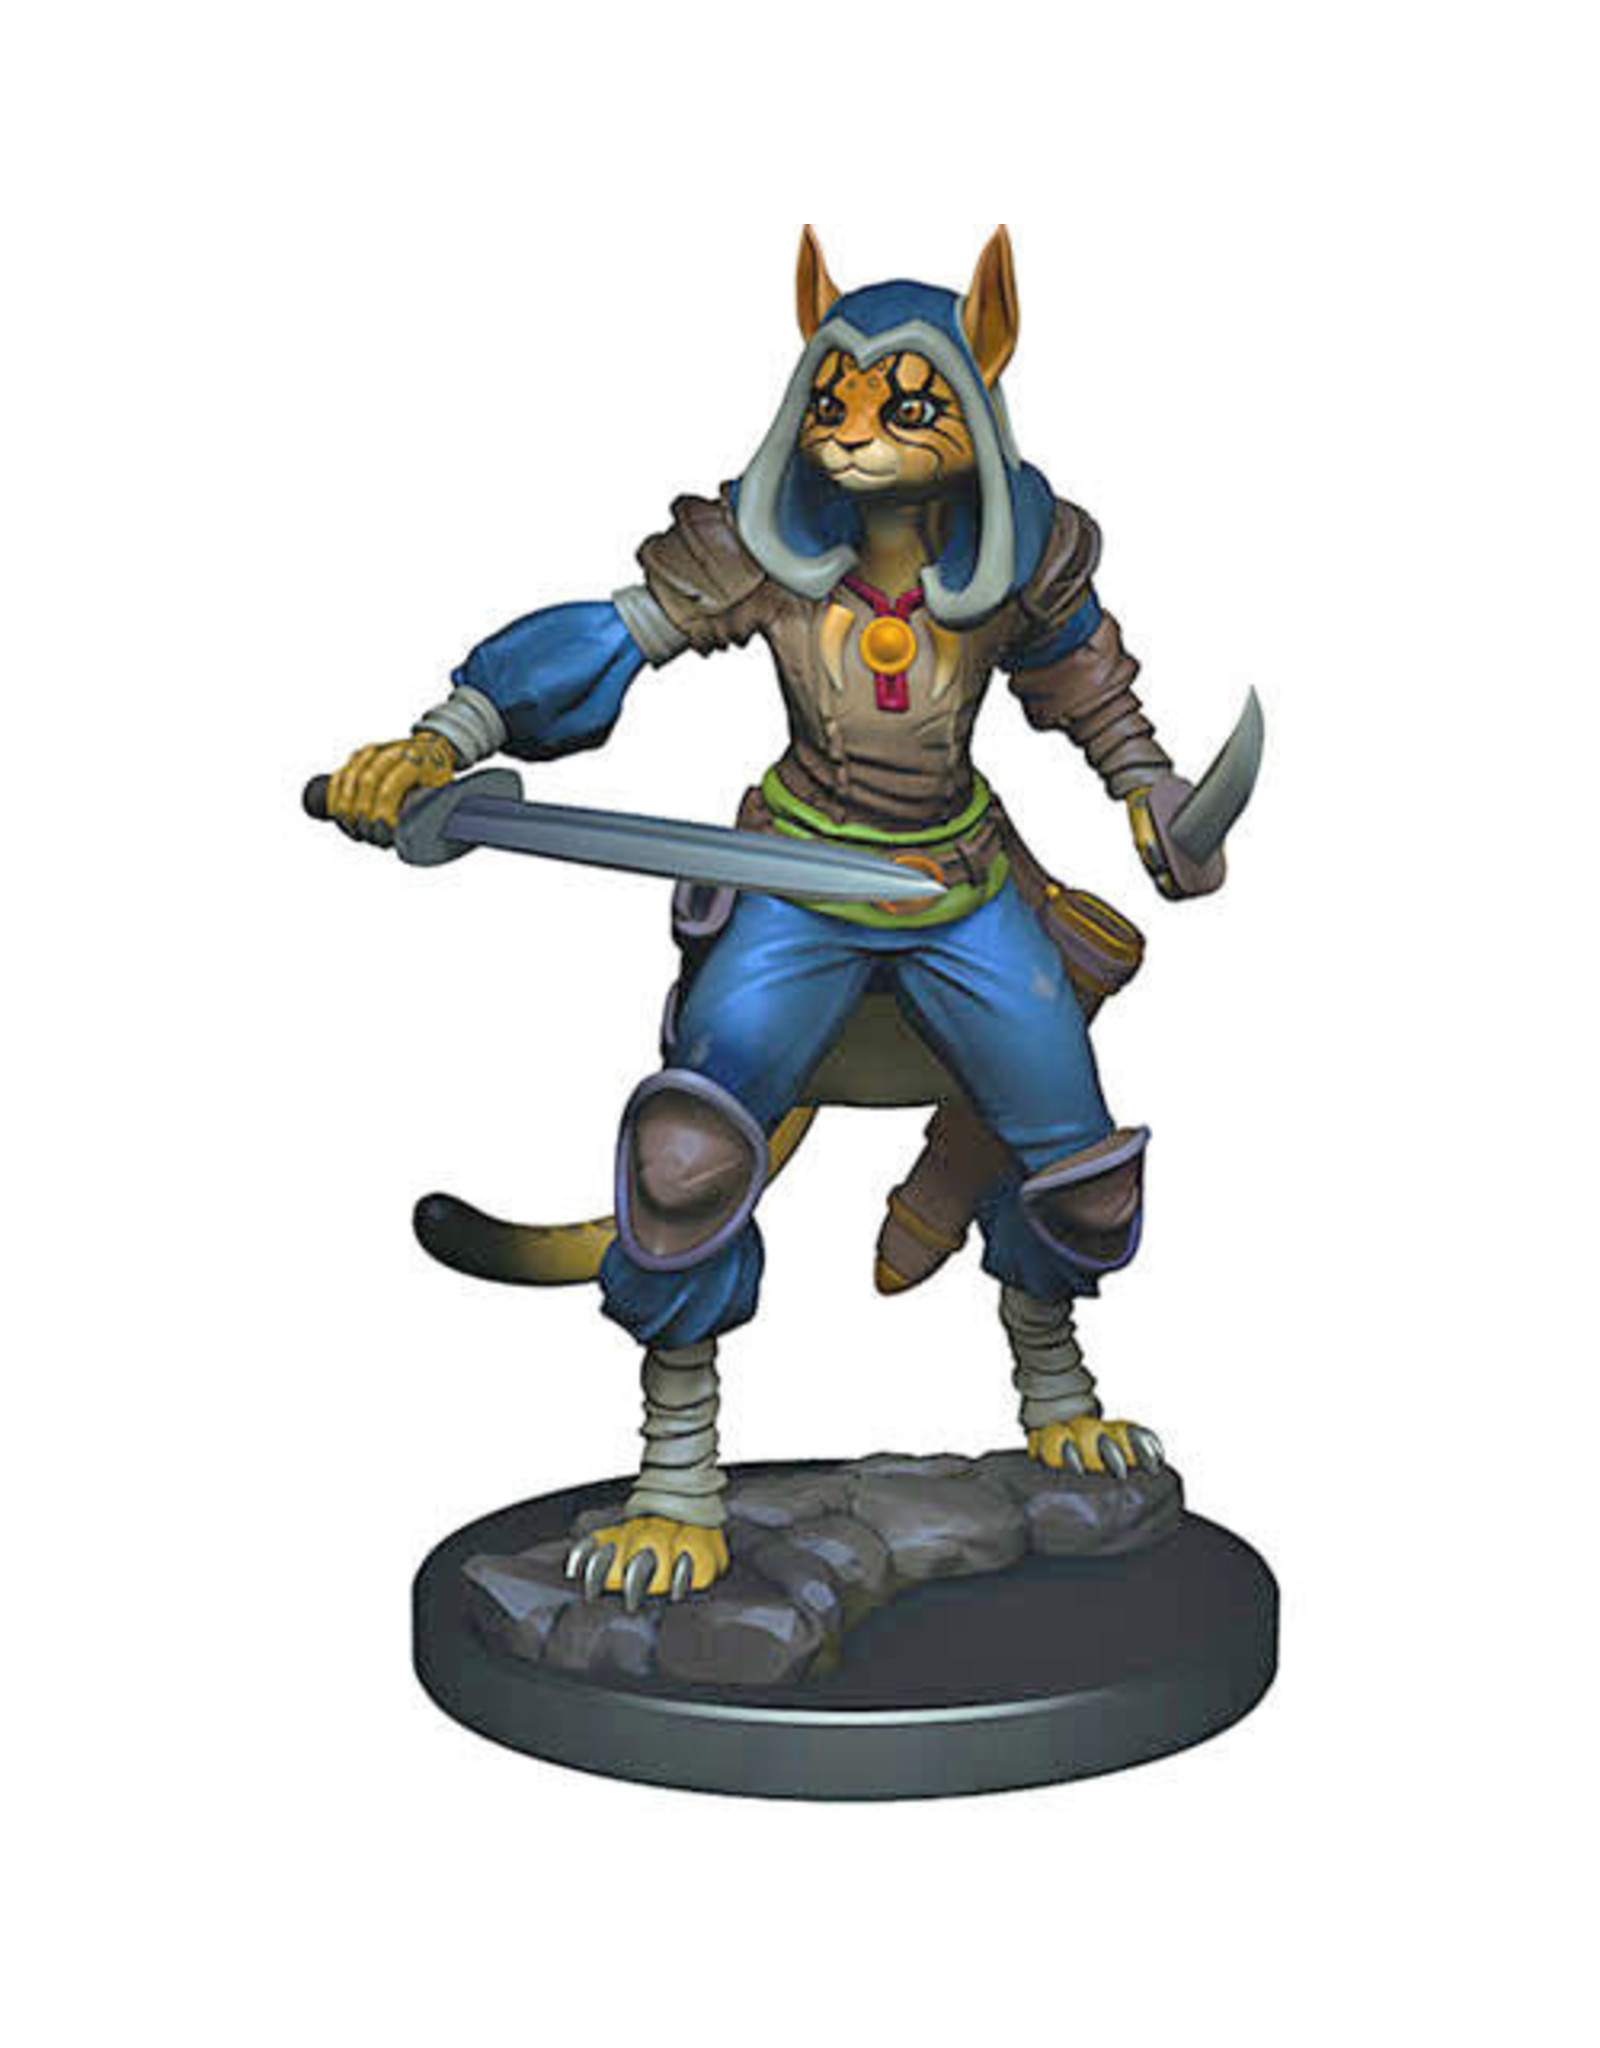 WizKids Dungeons & Dragons: Icons of the Realms Premium Figures W03 Female Tabaxi Rogue